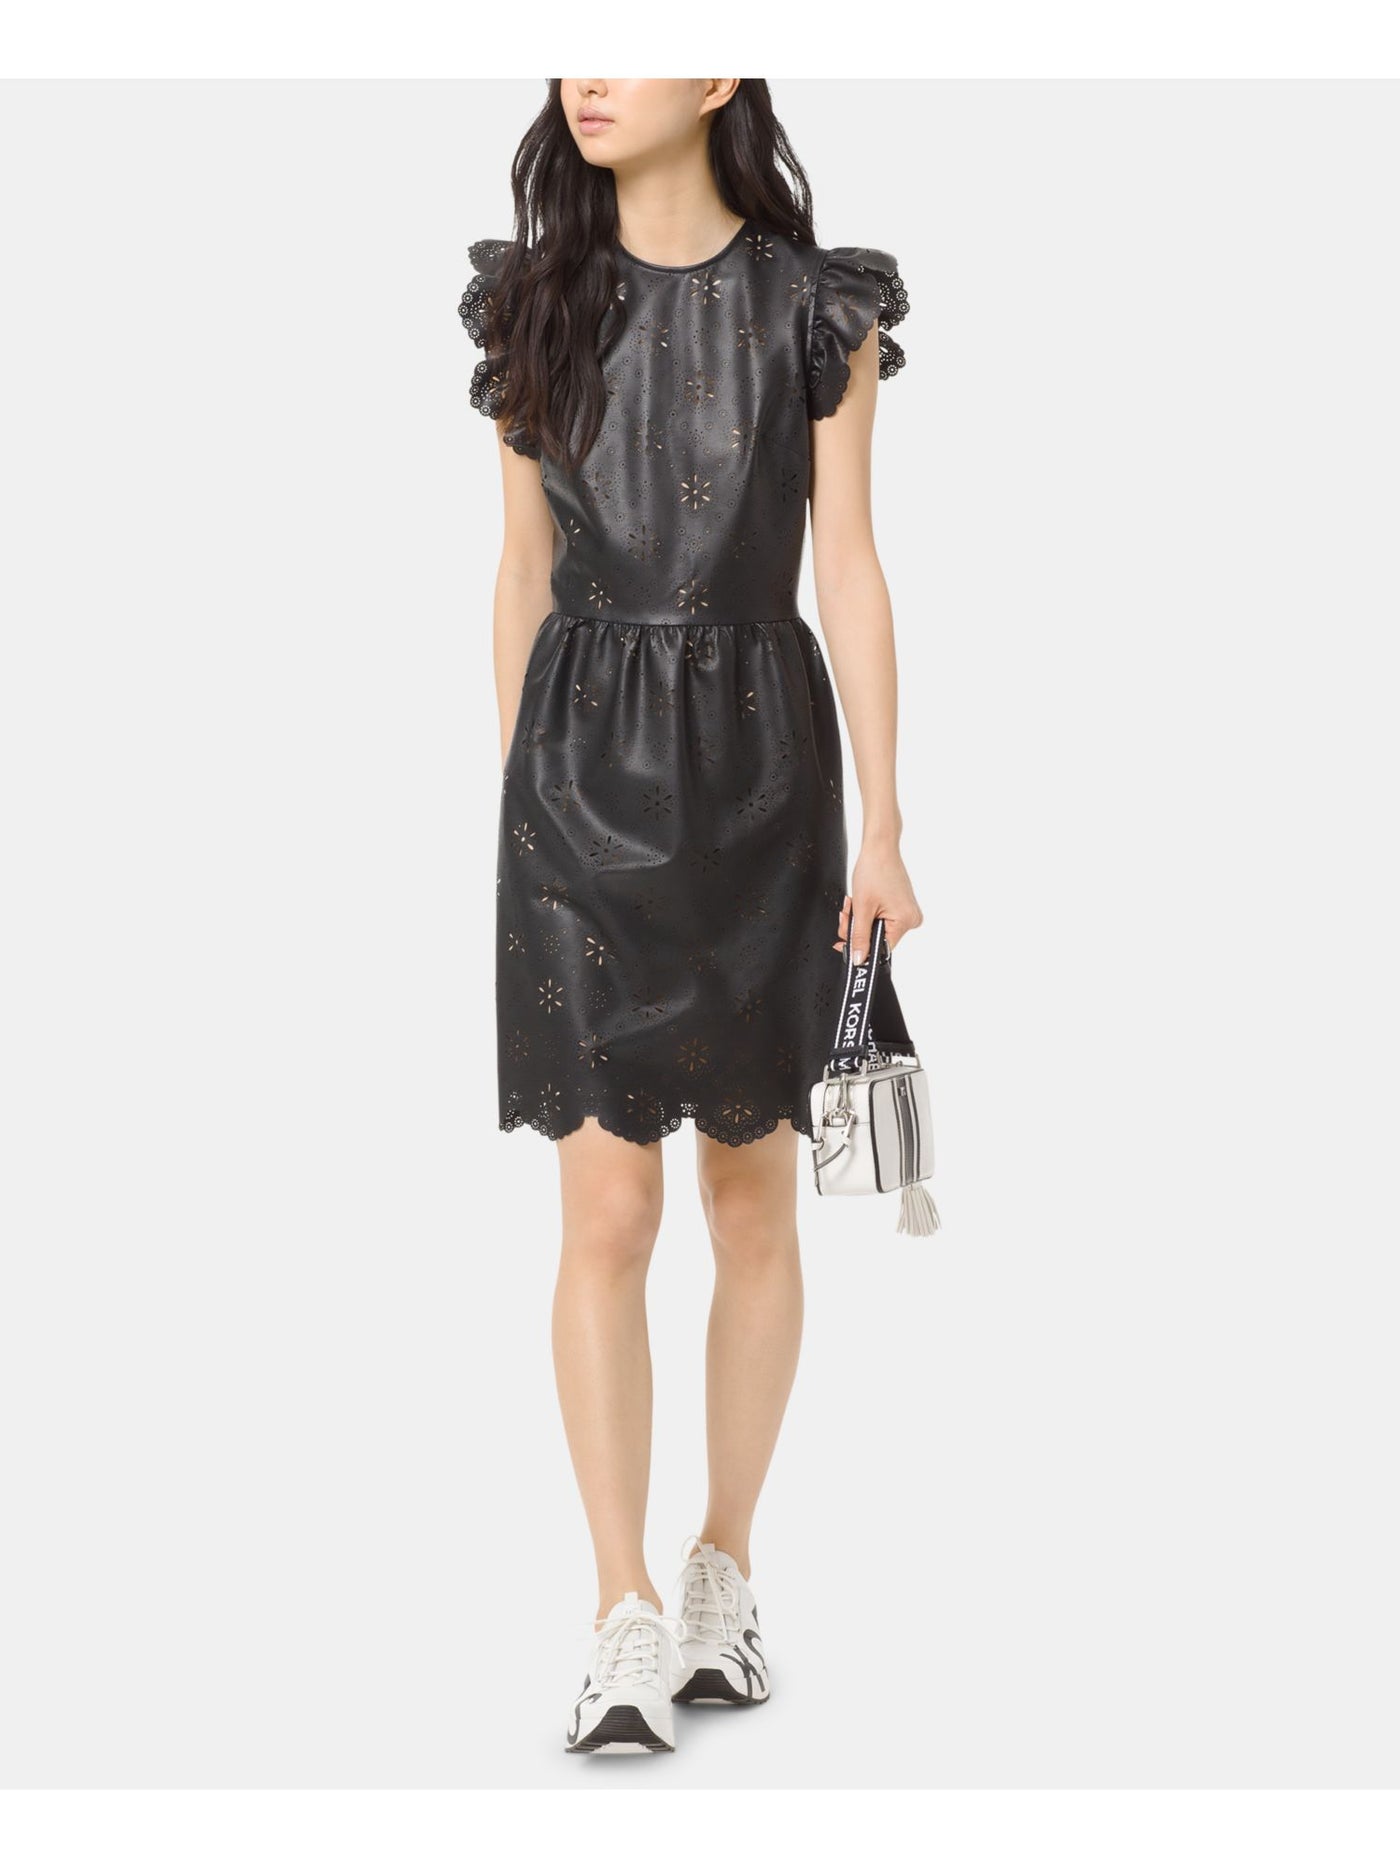 MICHAEL KORS Womens Faux Leather Ruffled Crew Neck Above The Knee Cocktail Sheath Dress